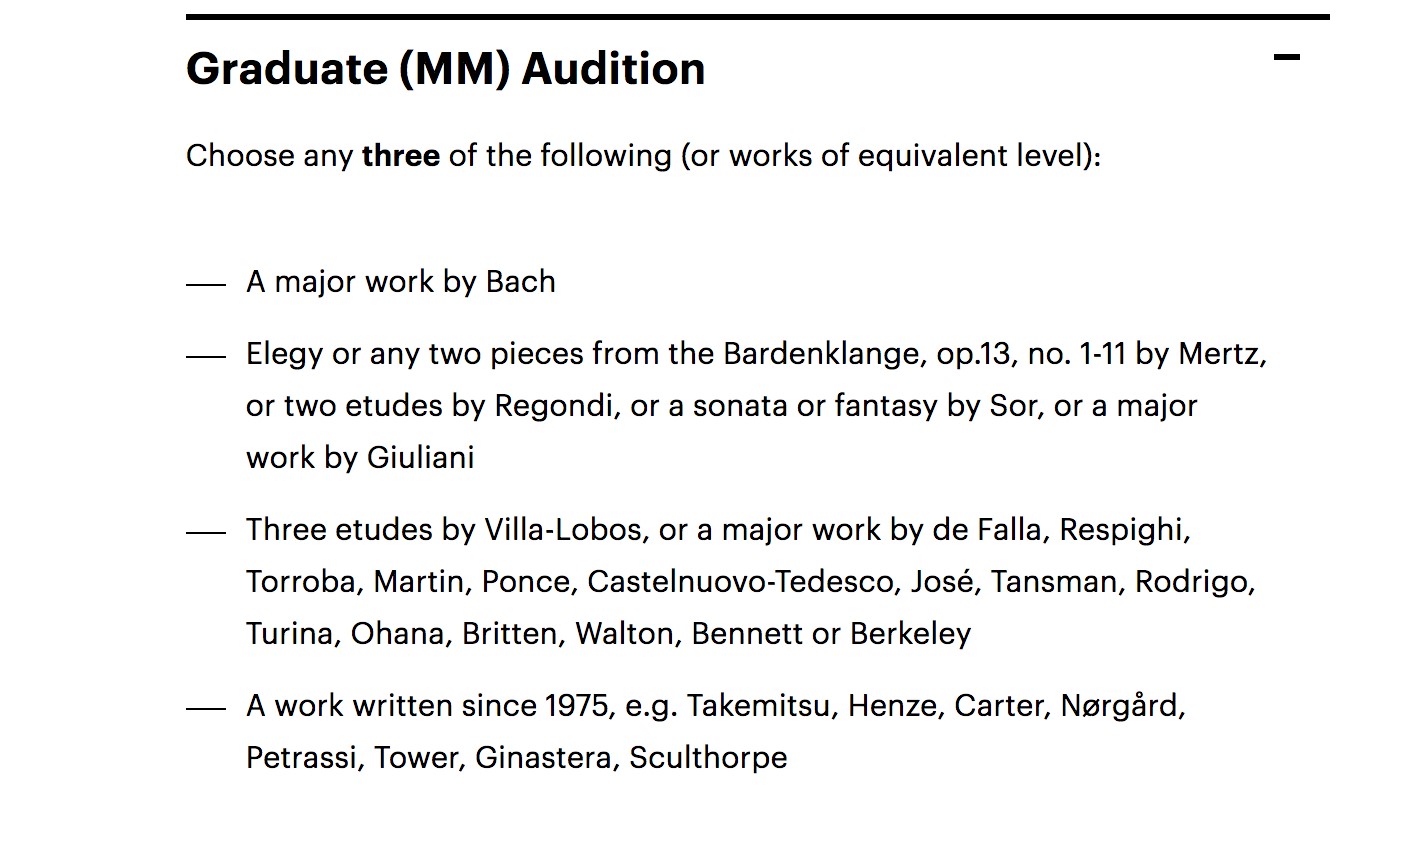 Graduate MM Audition - Choose any three of the following (or works of an equivalent level): A major work by Bach; Elegy or any two pieces from Bardenklange, op. 13#1-11 by Mertz, or two etudes by Regondi, or a sonata or fantasy by Sor, or a major work by Giuliani; Three etudes by Villa-Lobos, or a major work by de Falla, REspighi, Torroba, Martin, Ponce, Castelnuovo-Tedesco, José, Tansman, Rodrigo, Turina, Ohana, Britten, Walton, Bennett or Berkeley; A work written since 1975, e.g., Takemitsu, Henze, Carter, Nørgård, Petrassi, Tower, Ginastera, Sculthorpe.